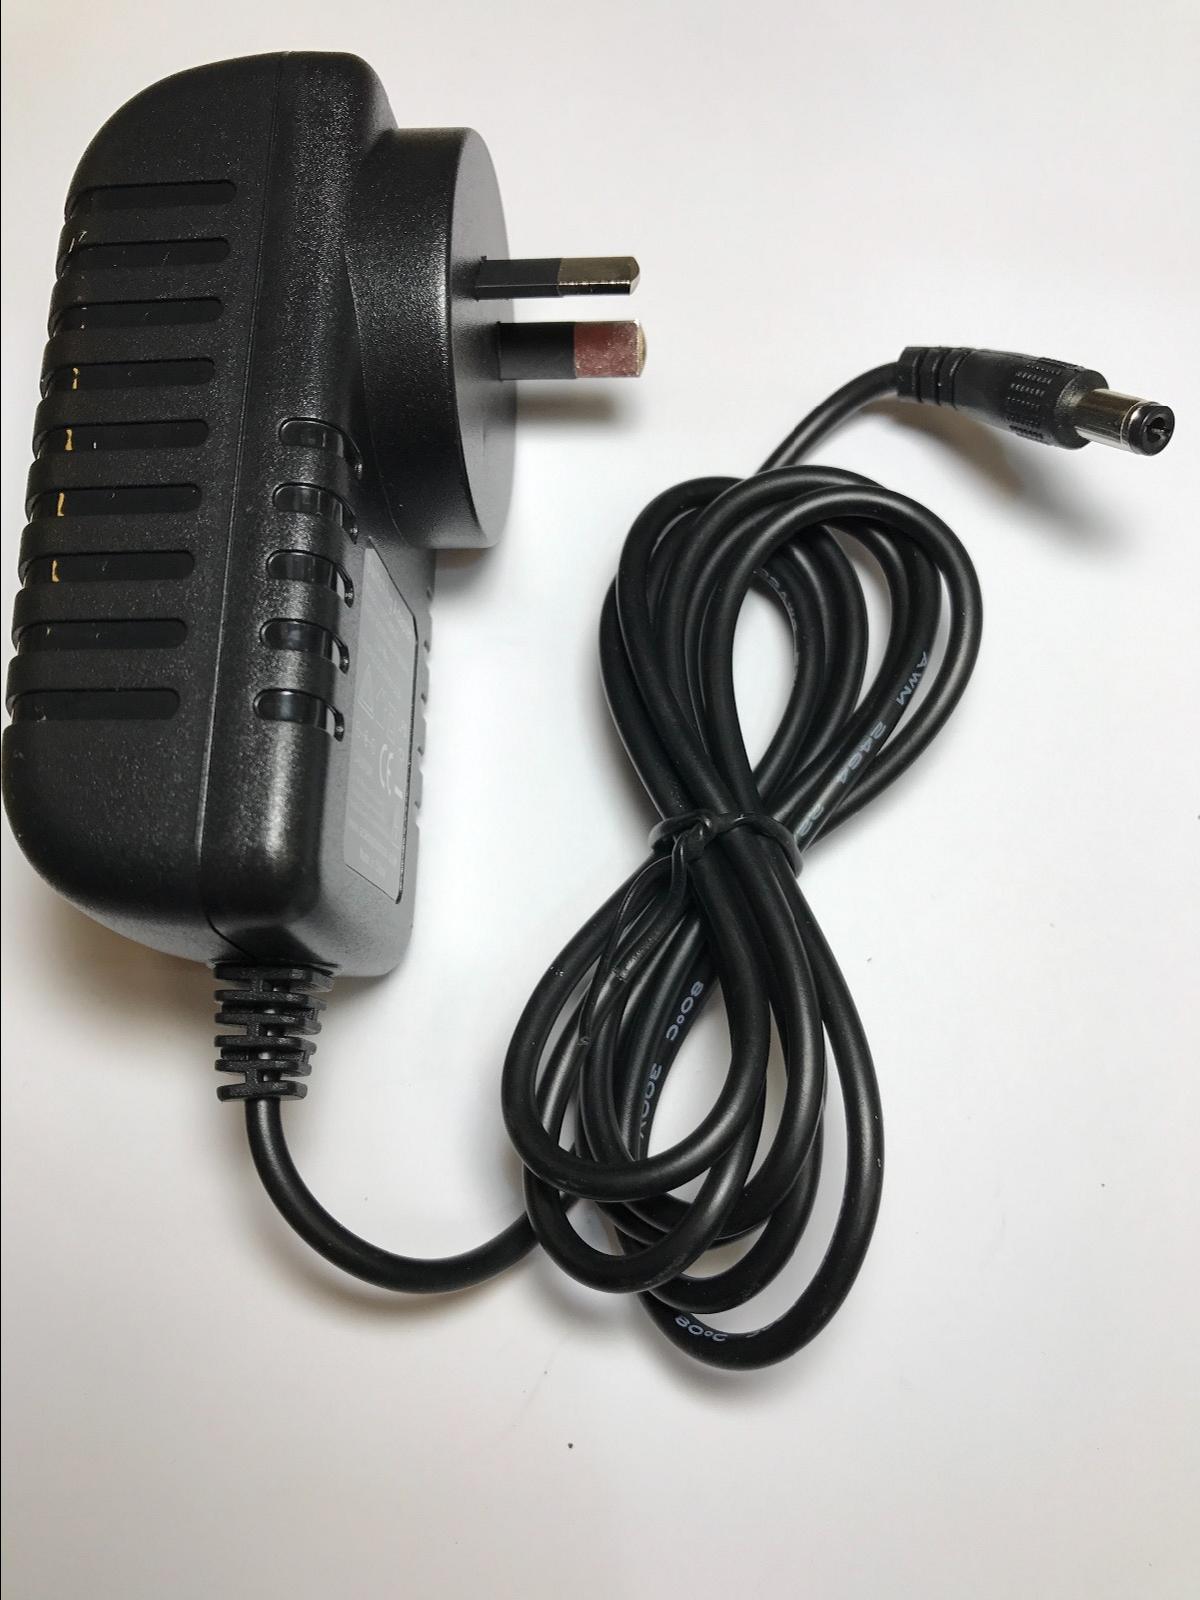 12V 2A DC 5.5mm AC/DC Power Adapter Charger For WD My Book Elements External